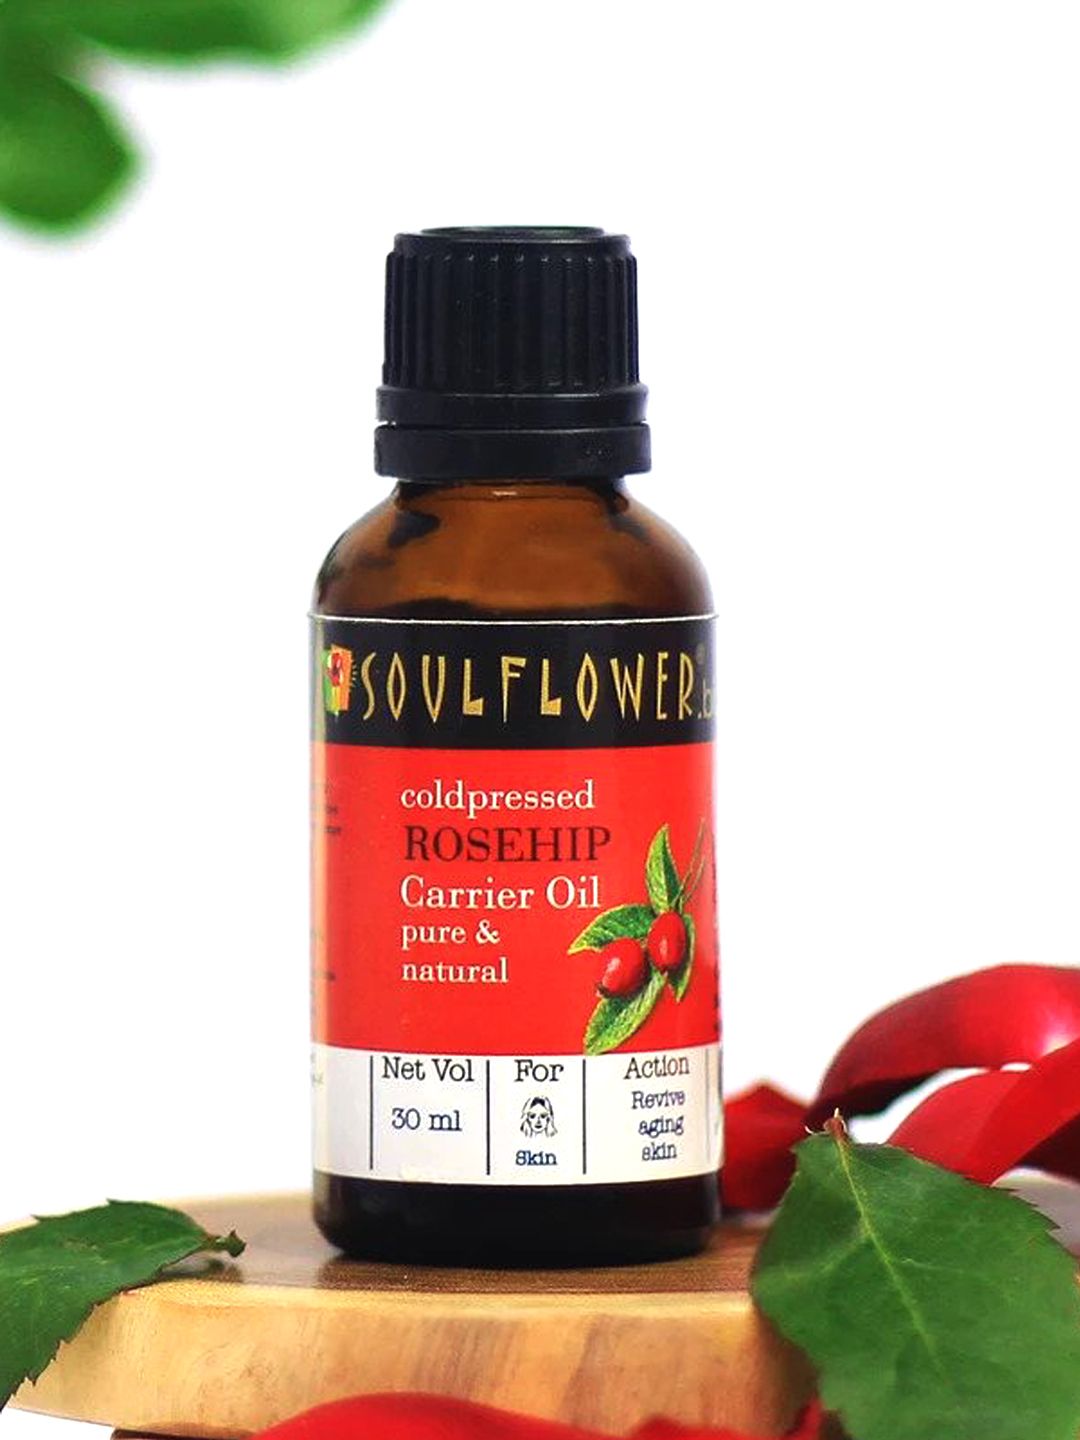 Soulflower Rosehip Hair Oil Revive Aging Skin - Skin & Hair 100% Pure Cold Pressed - 30 ml Price in India